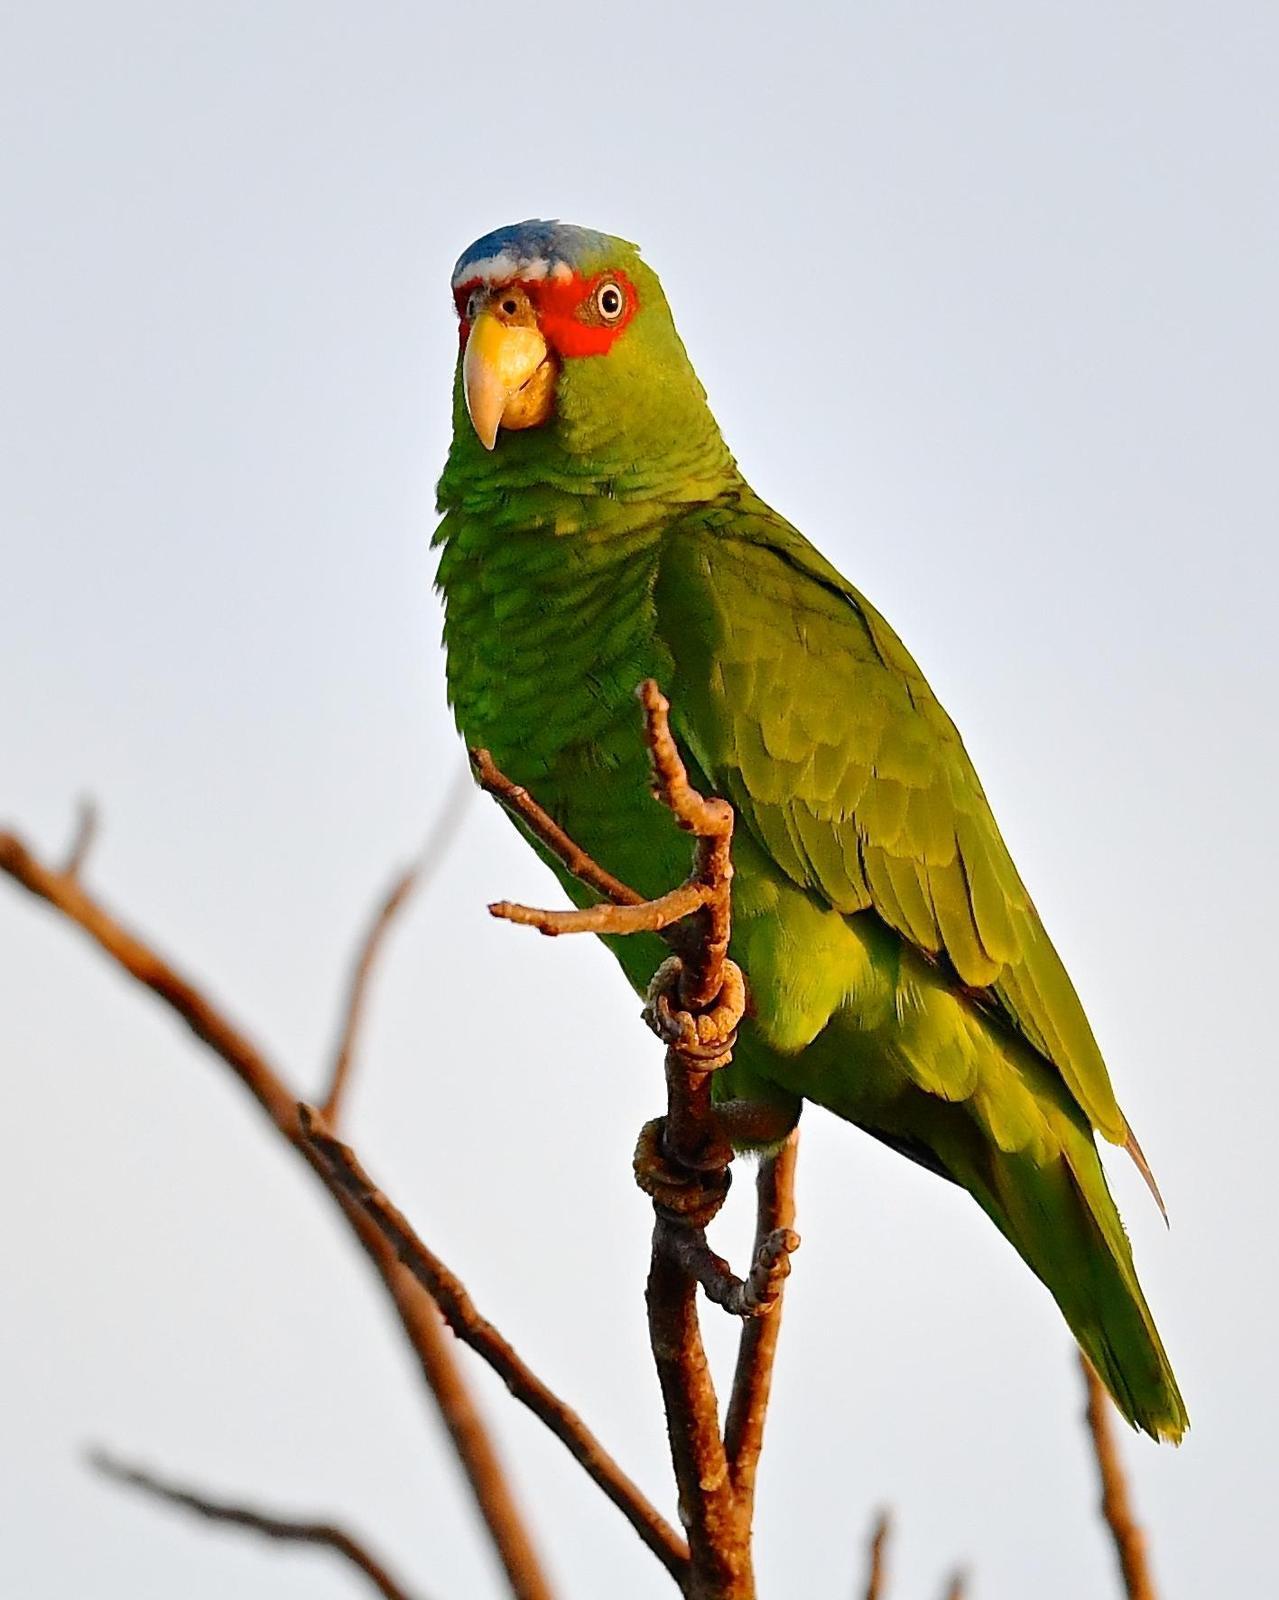 White-fronted Parrot Photo by Gerald Friesen